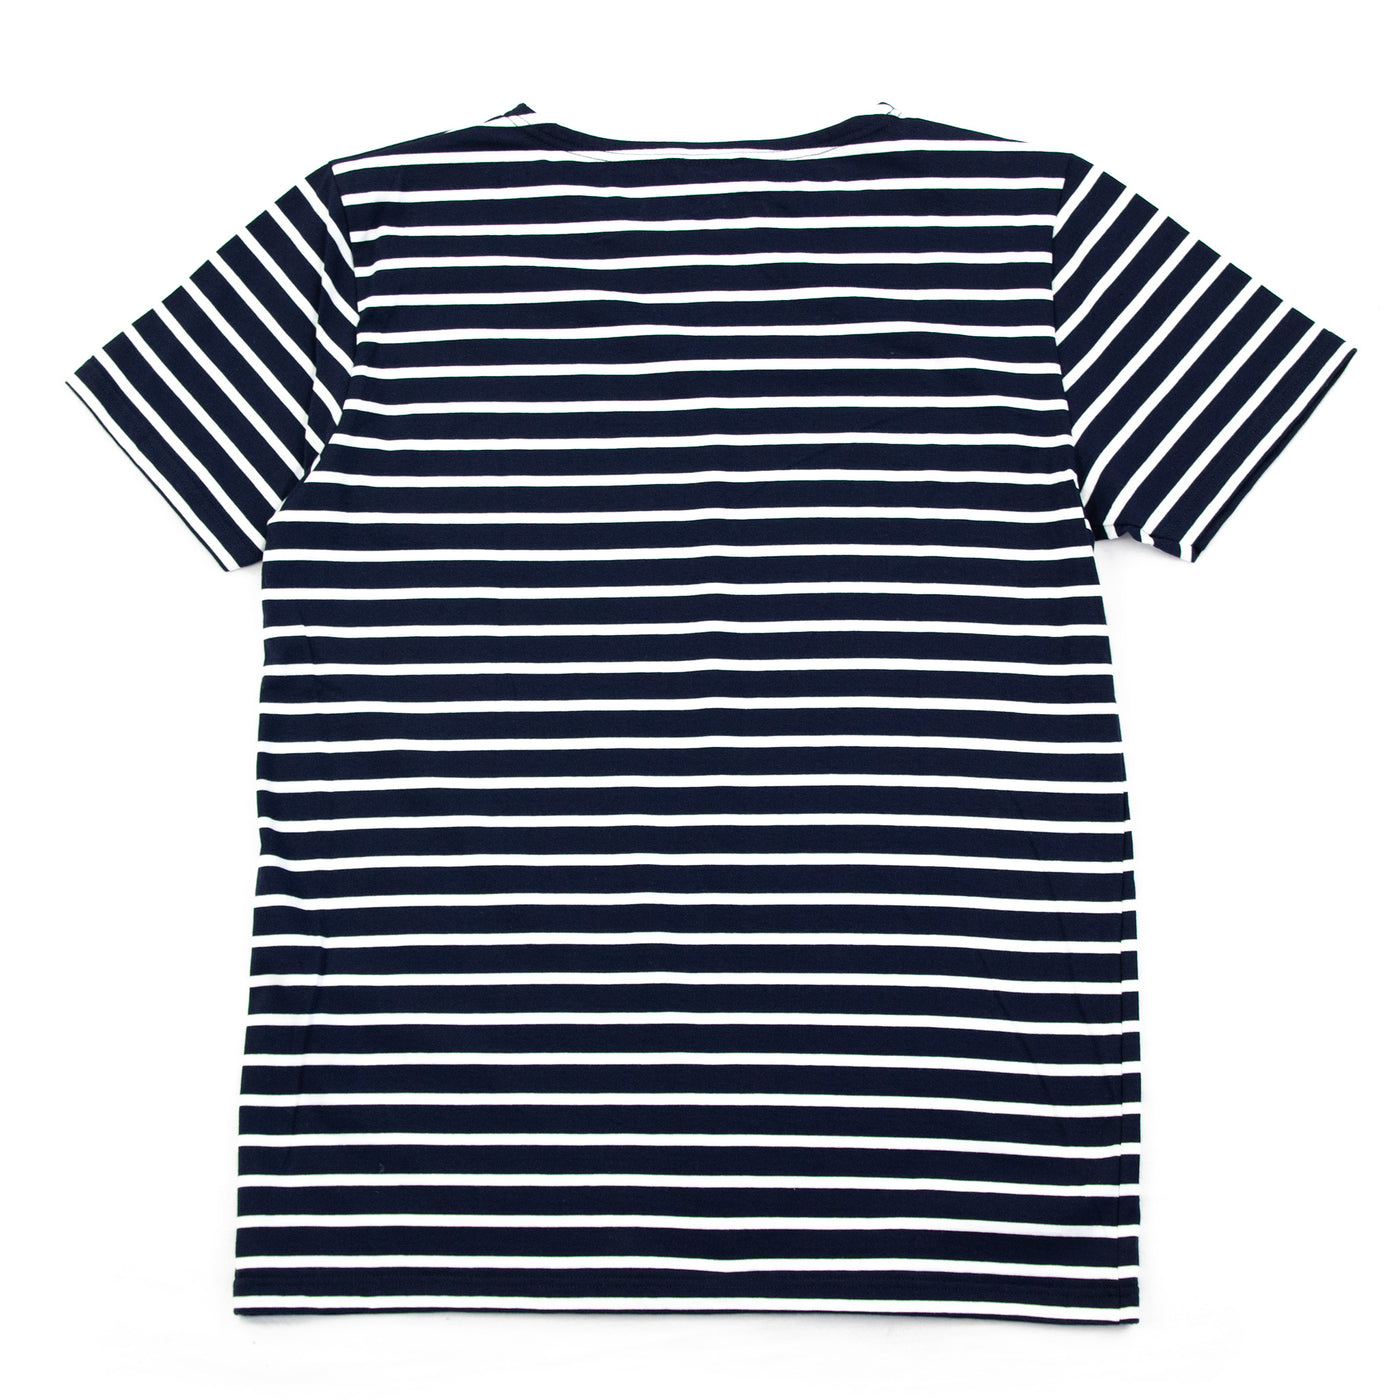 Armor Lux Sailor Mariniere Hoedic T-Shirt Navy / White Back